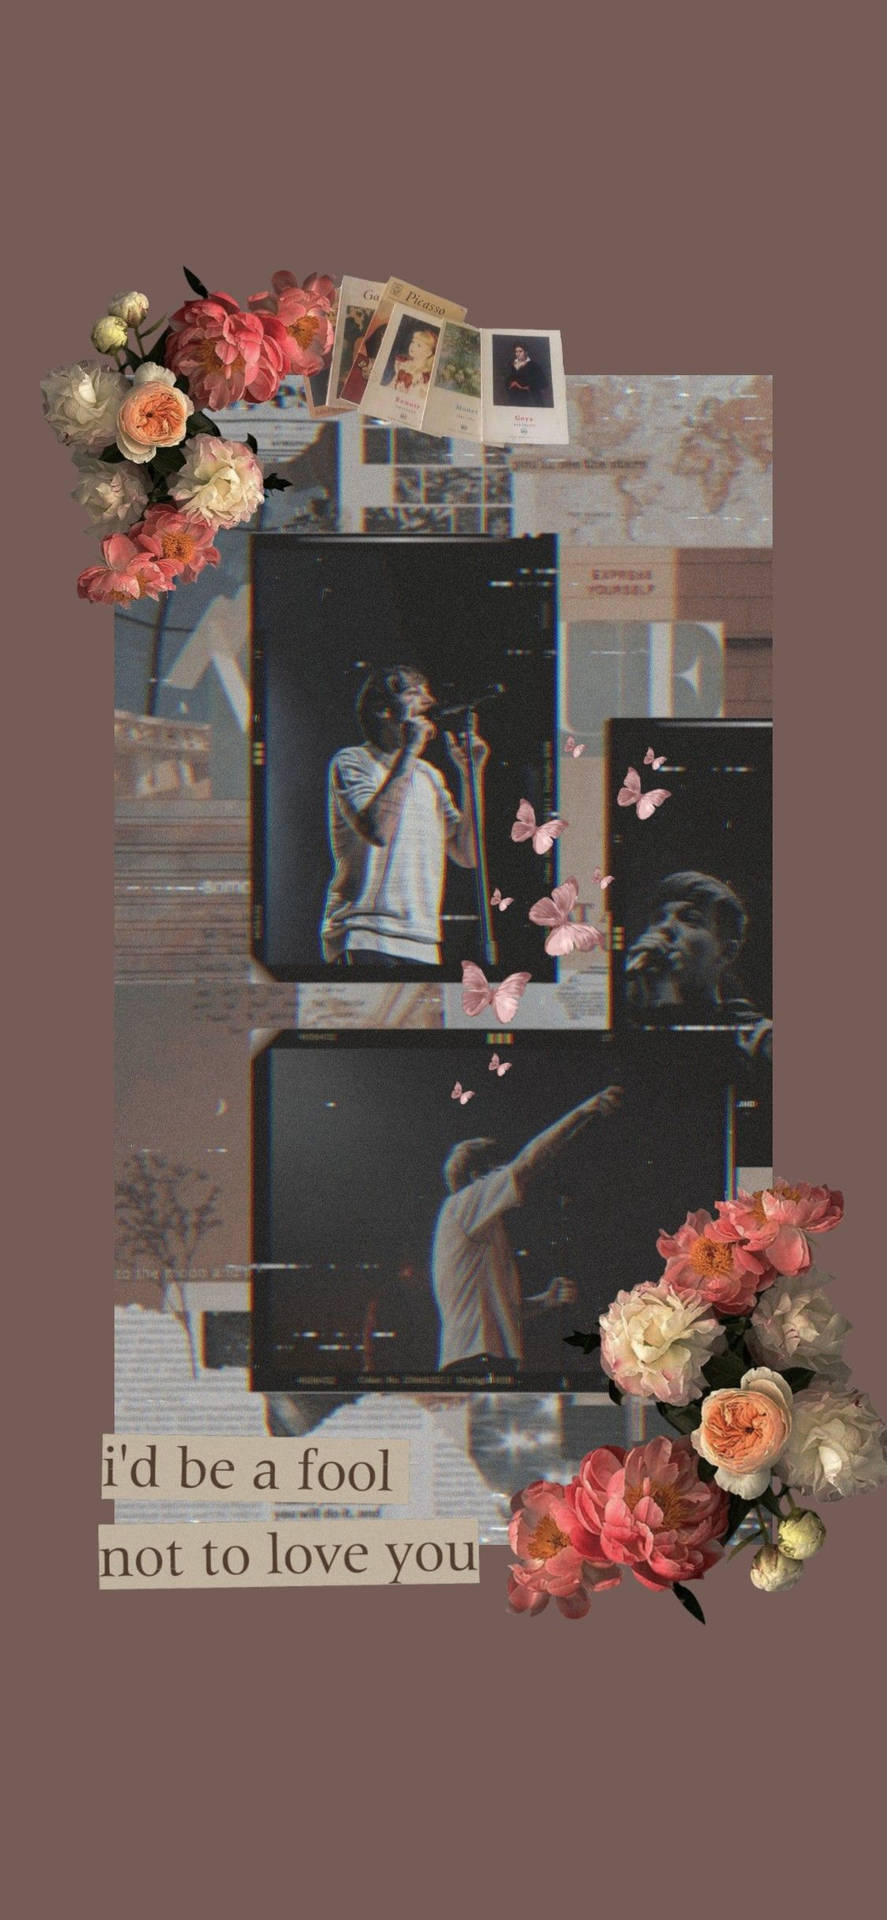 Louis Tomlinson Amidst Blooming Flowers Background